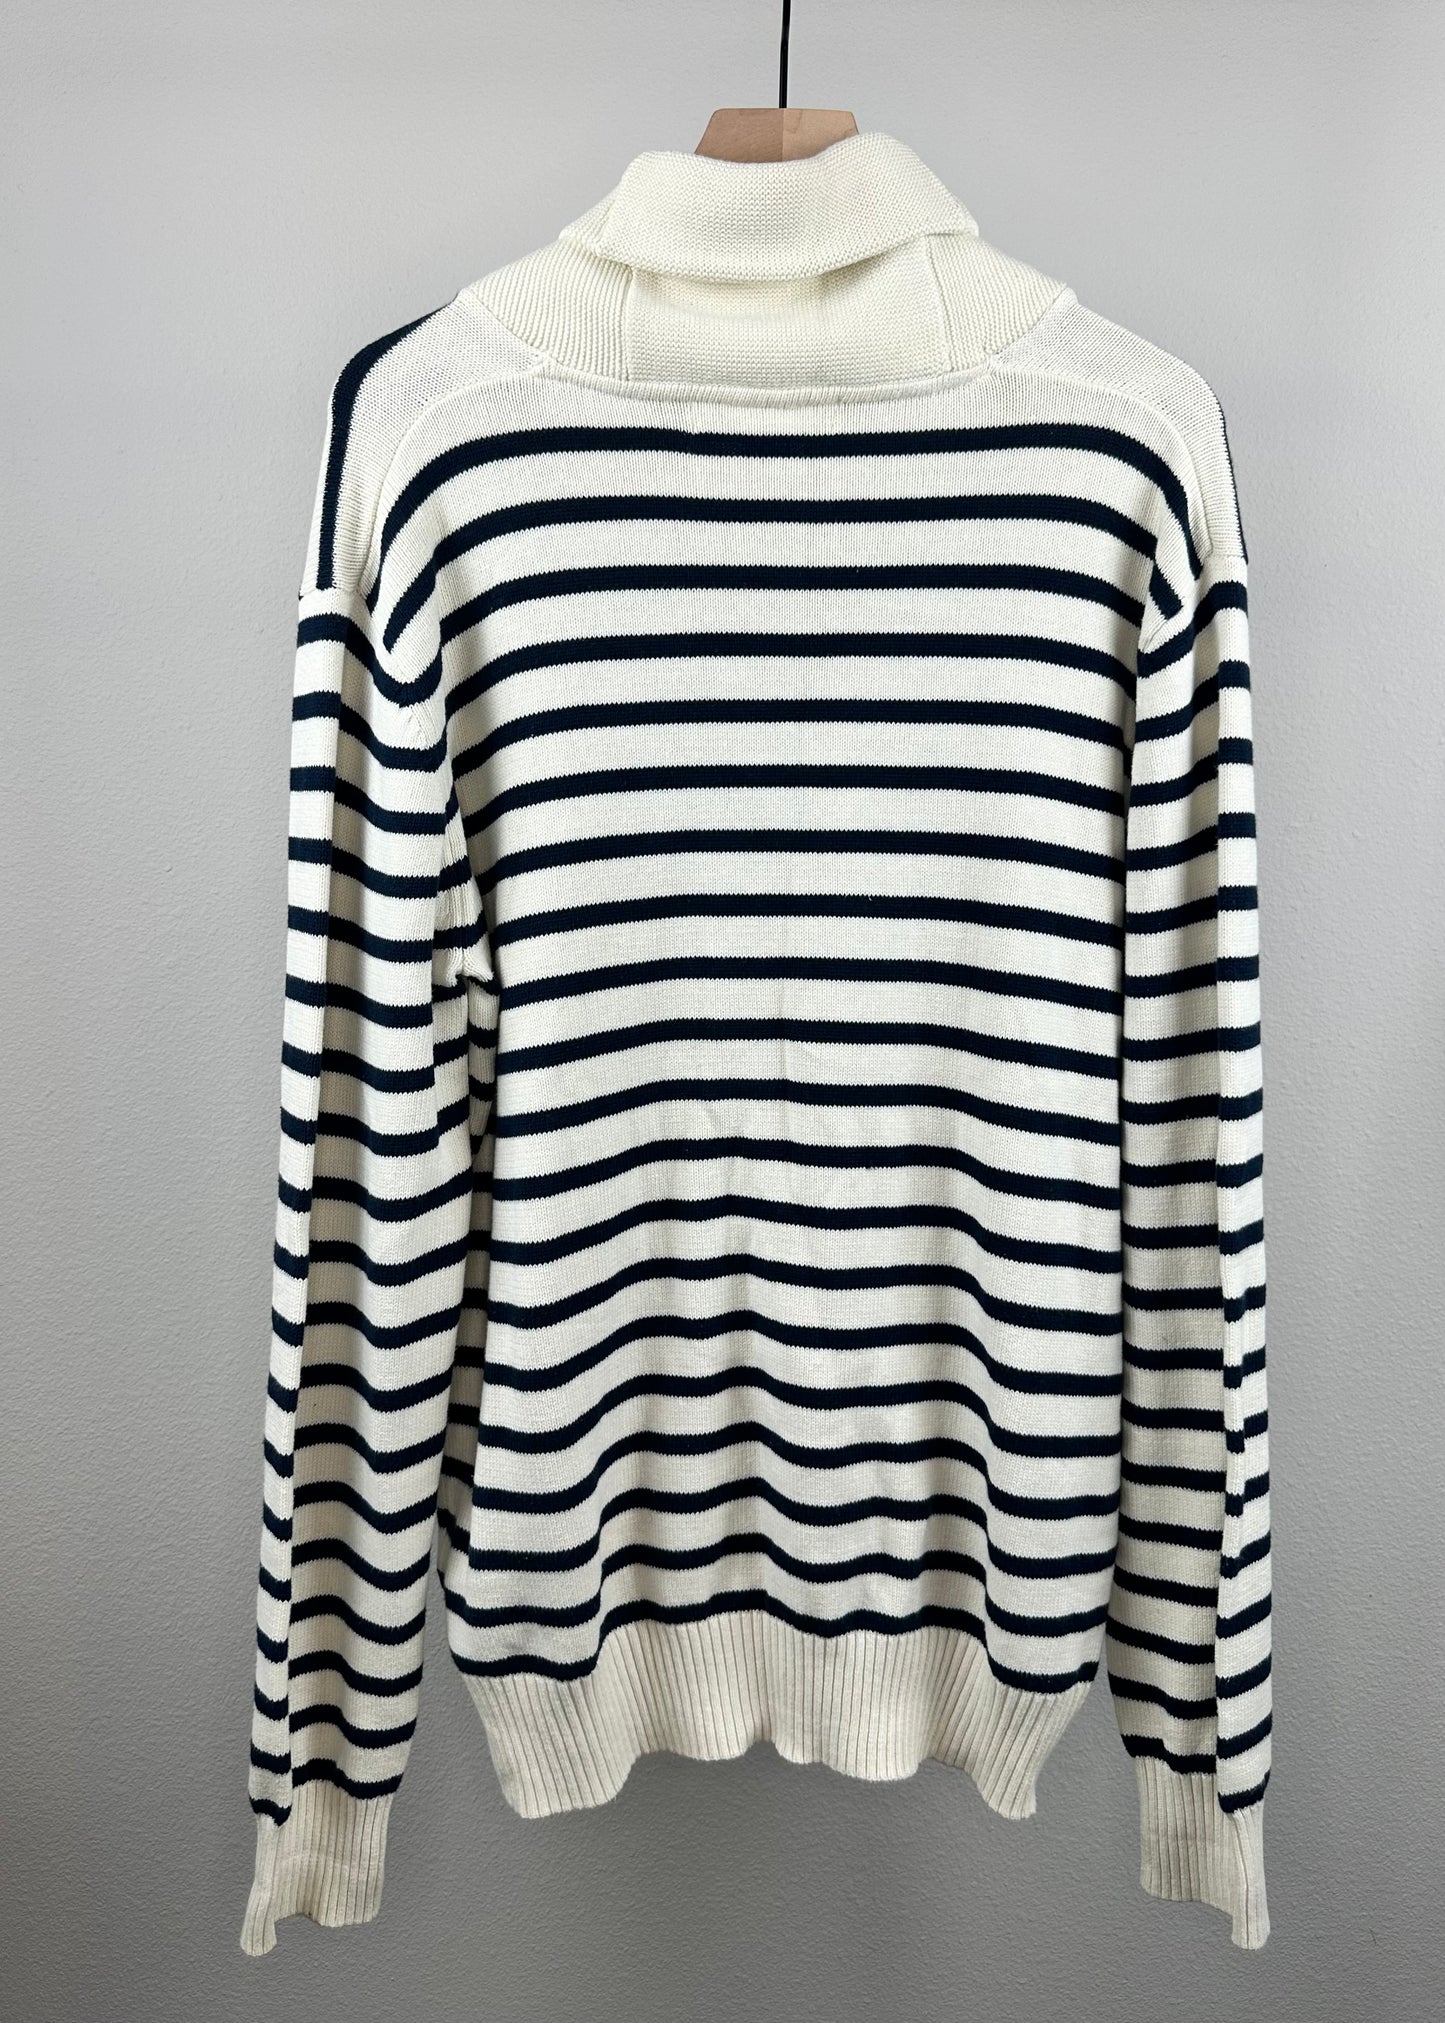 Blue and White Sweater By H&M